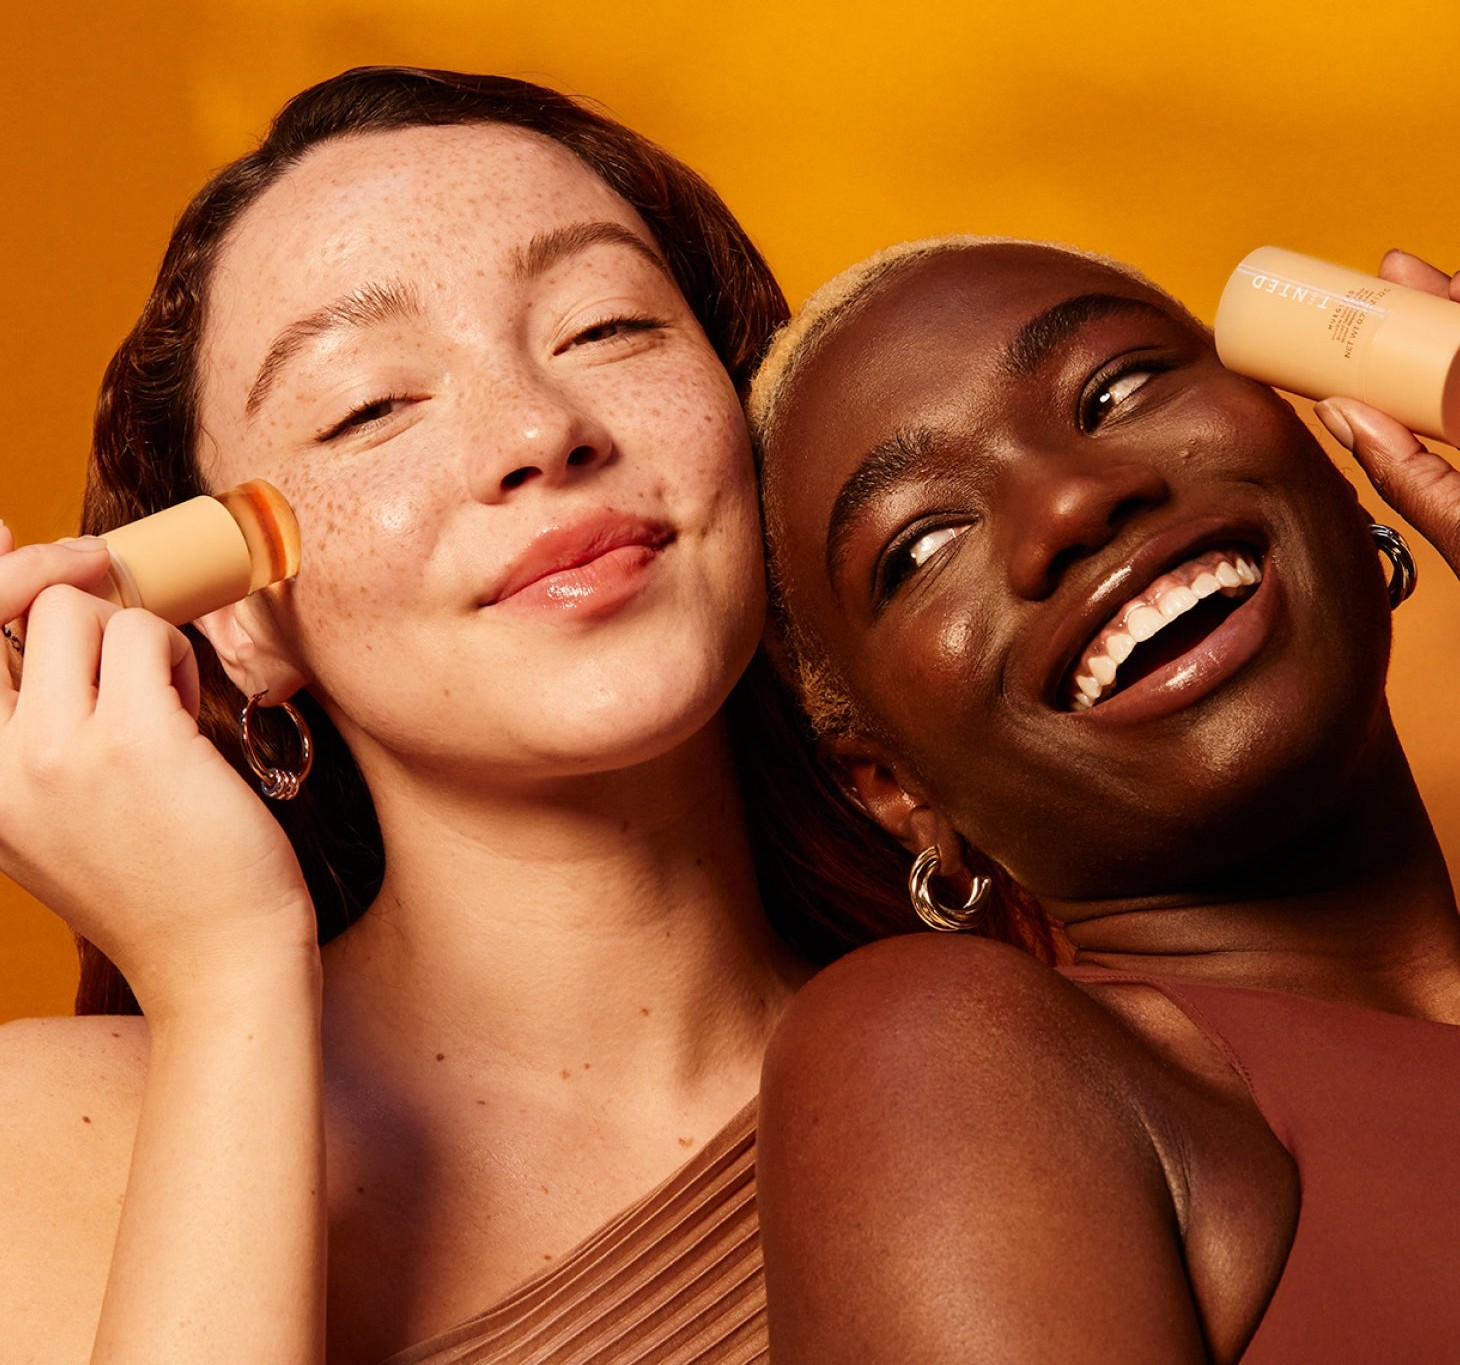 women smiling and holding Live Tinted products